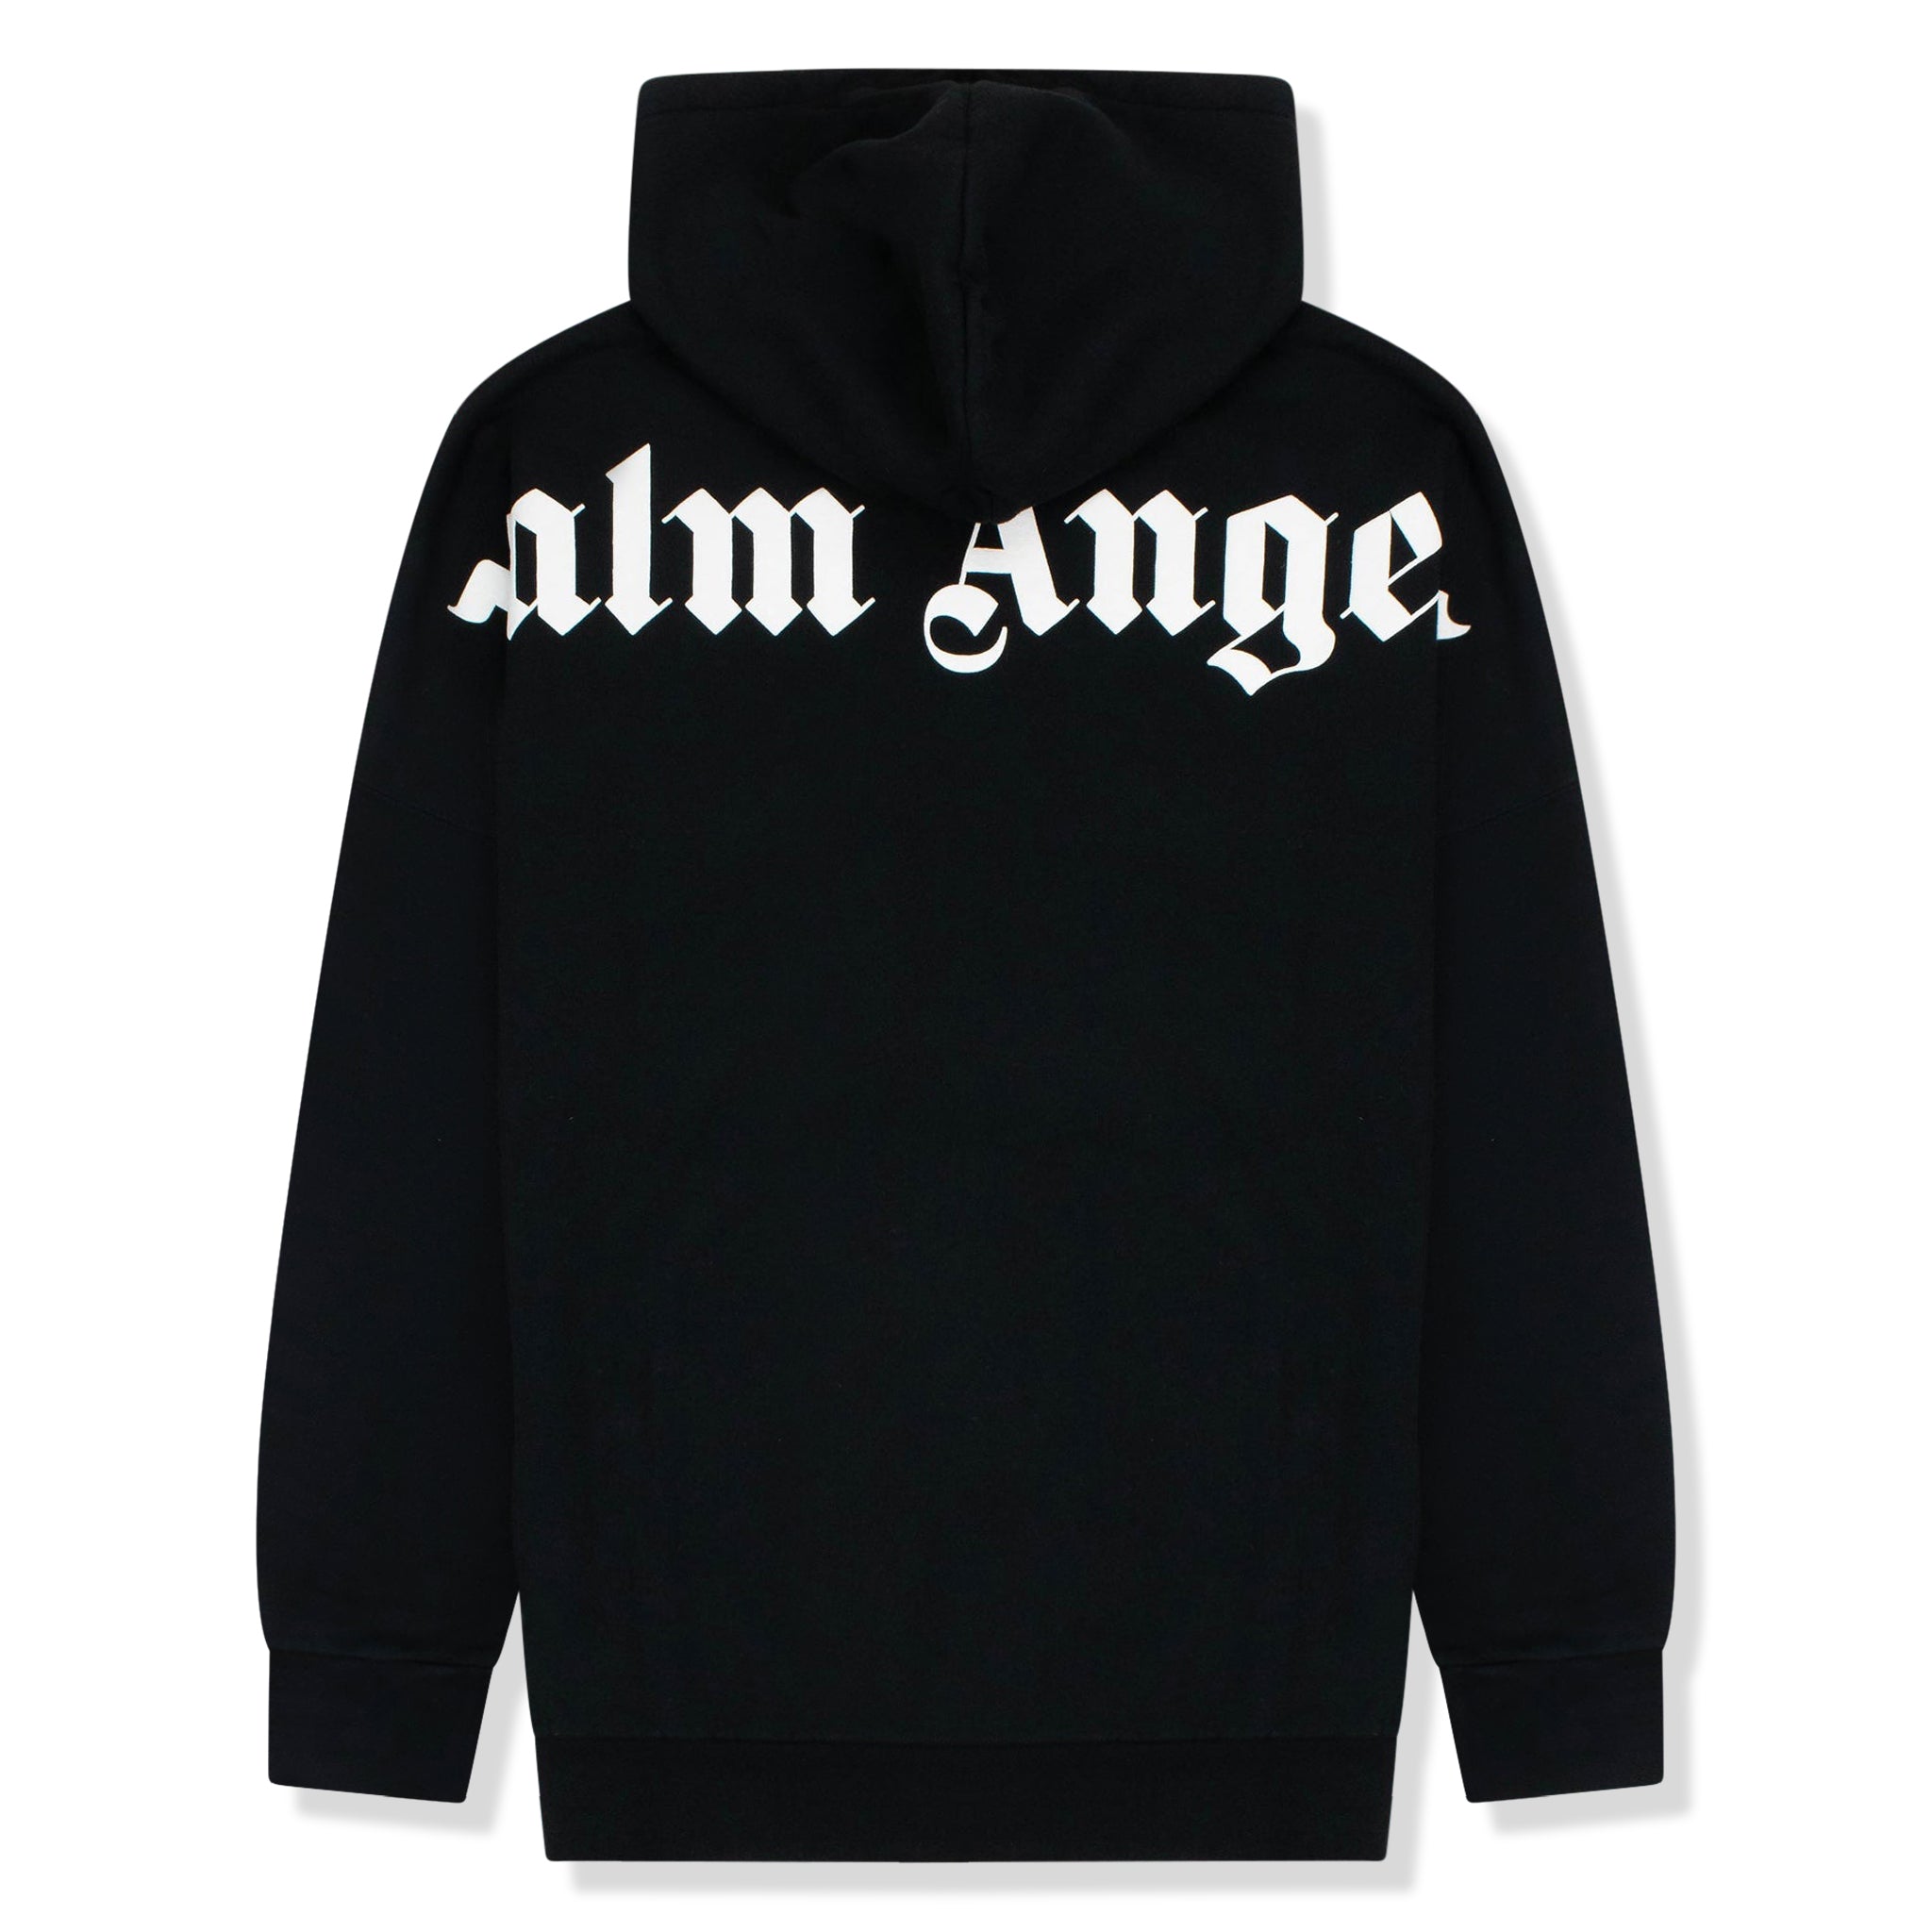 Palm Angels Over The Head Logo Black Hoodie